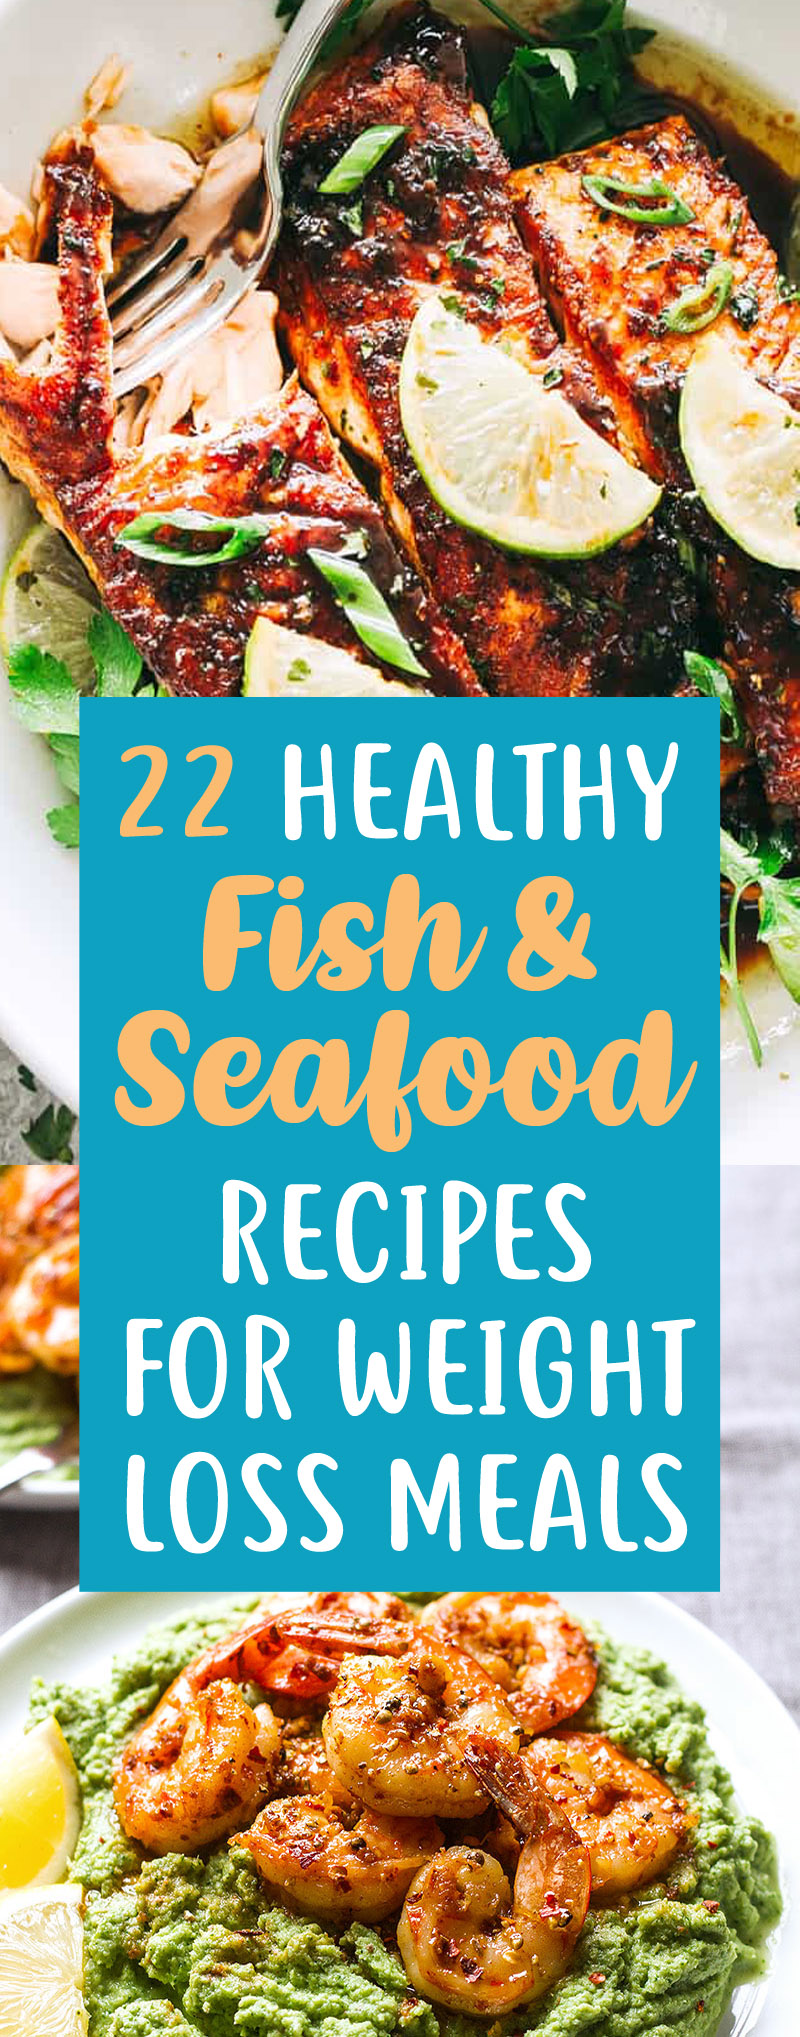 22 Fish & Seafood Recipes That Make An Easy Delicious Weight Loss